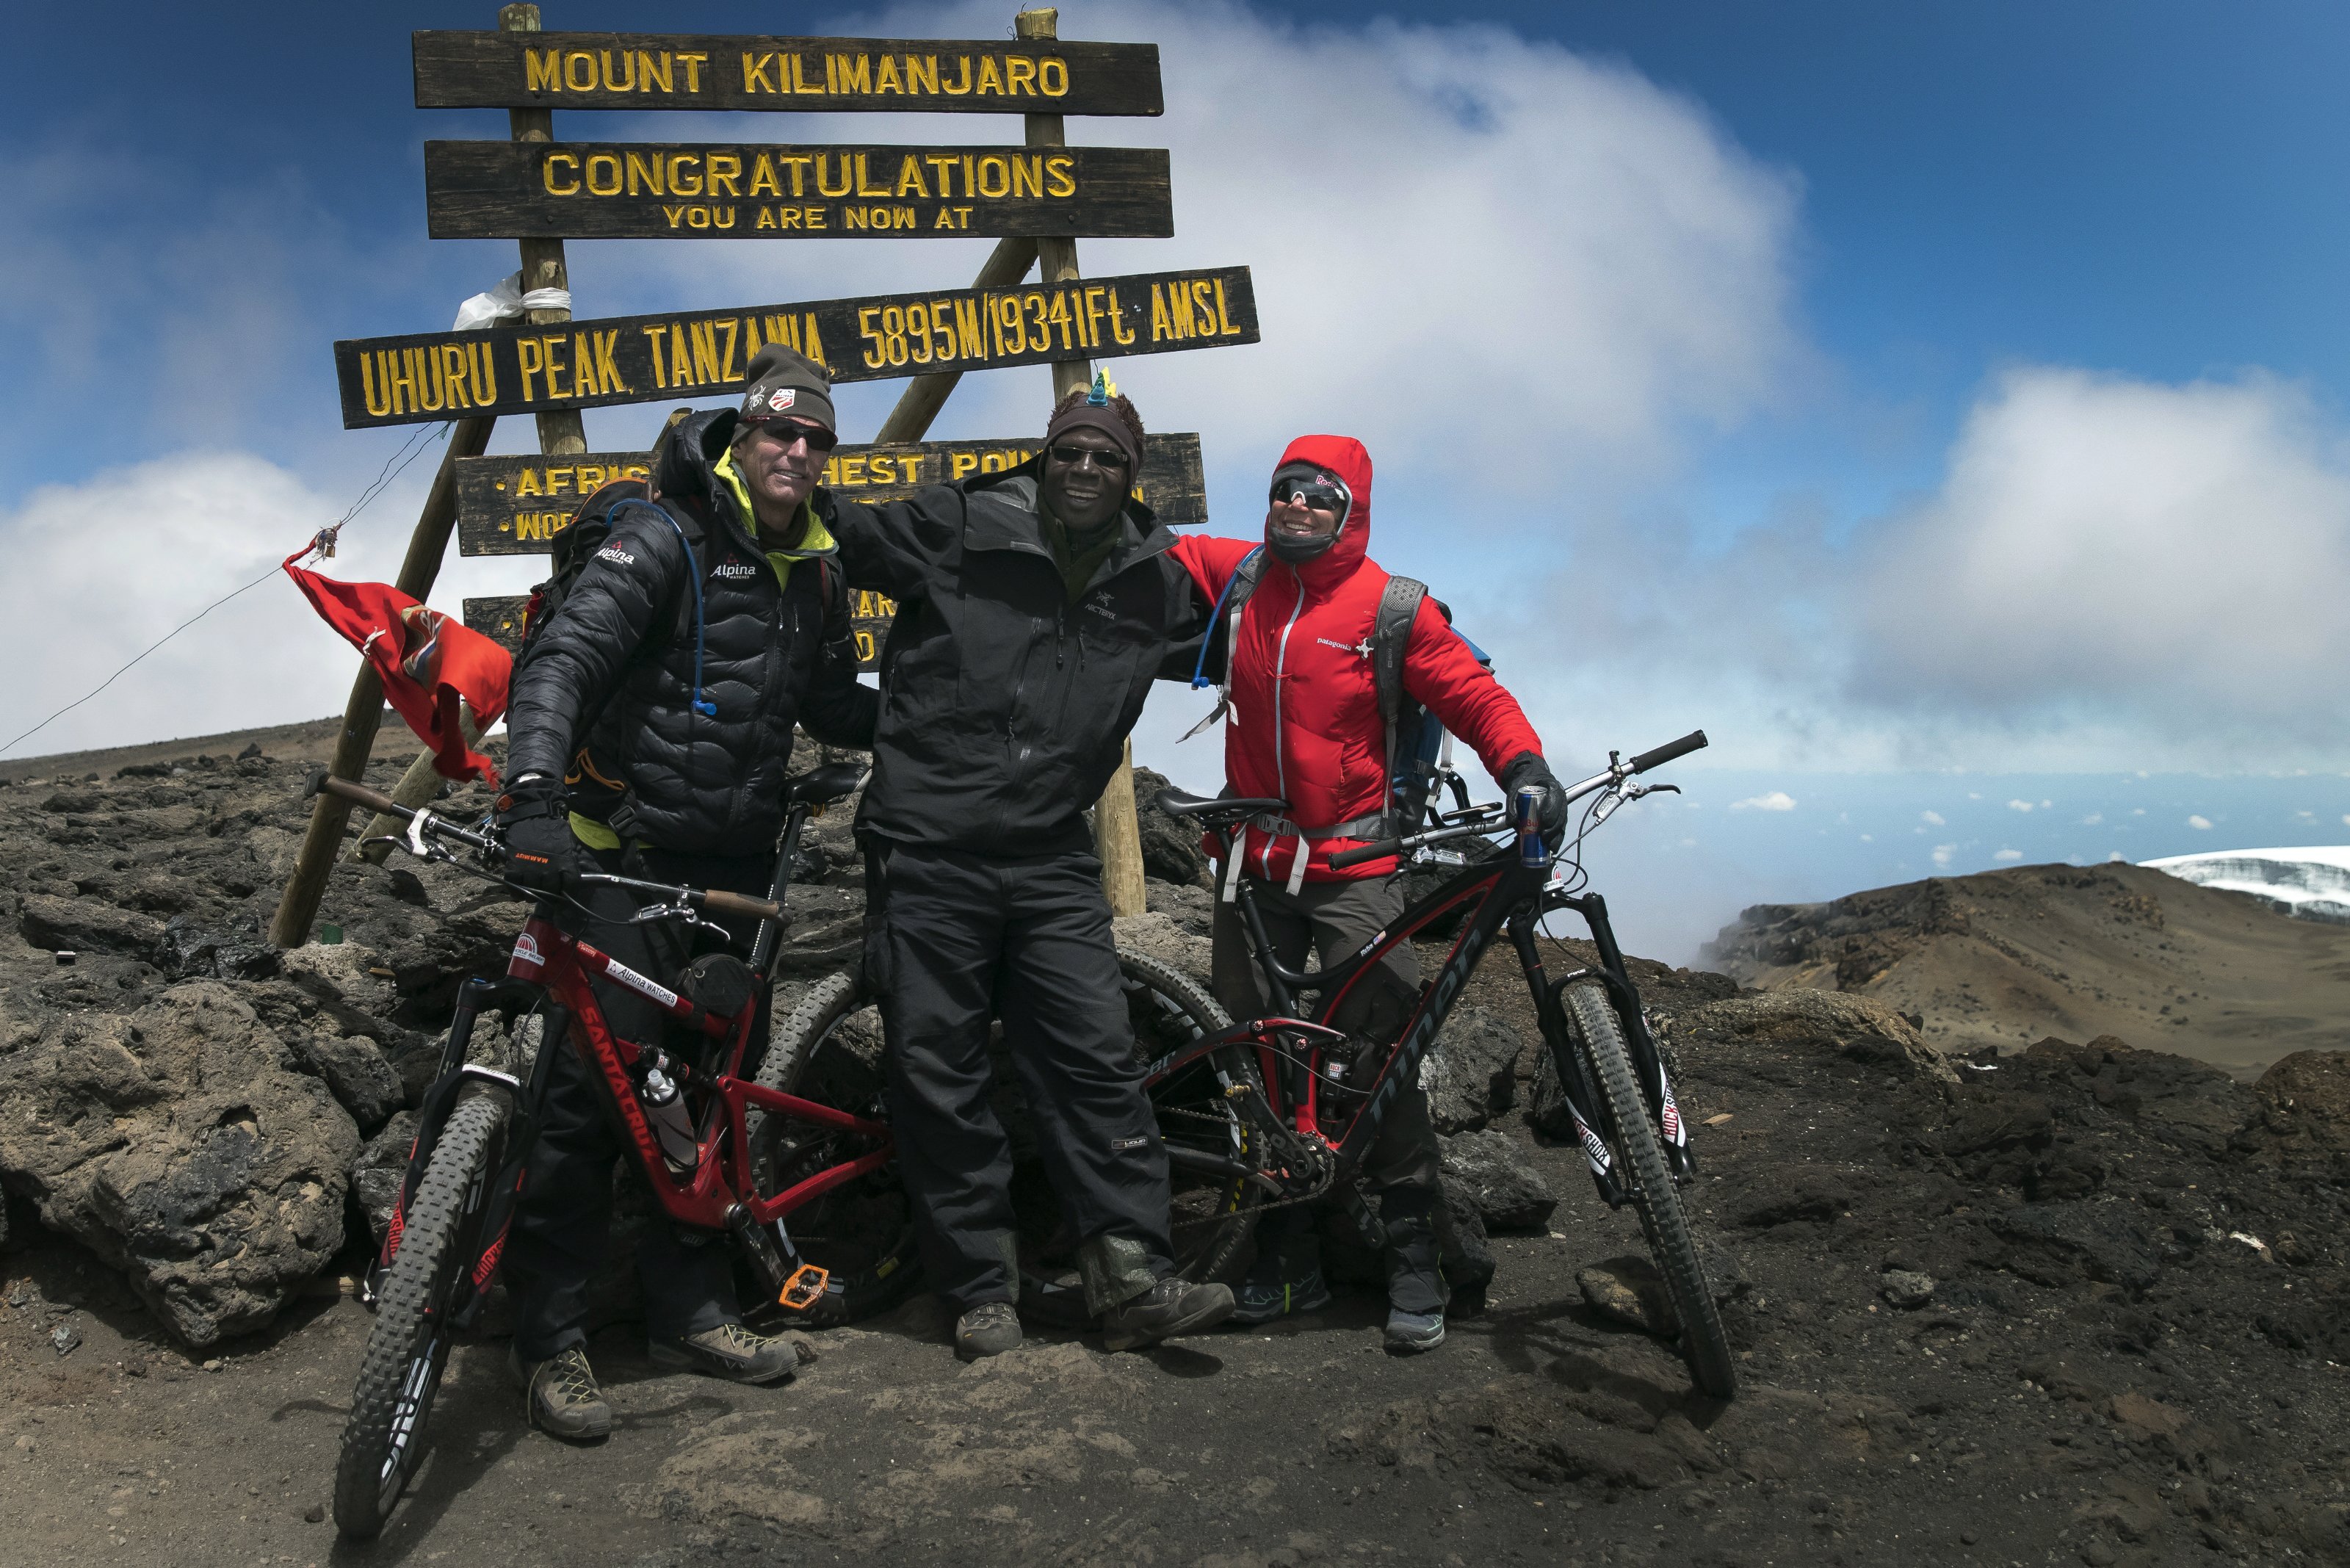 Video: Riding Up Mount Kilimanjaro, The Power of Bicycles